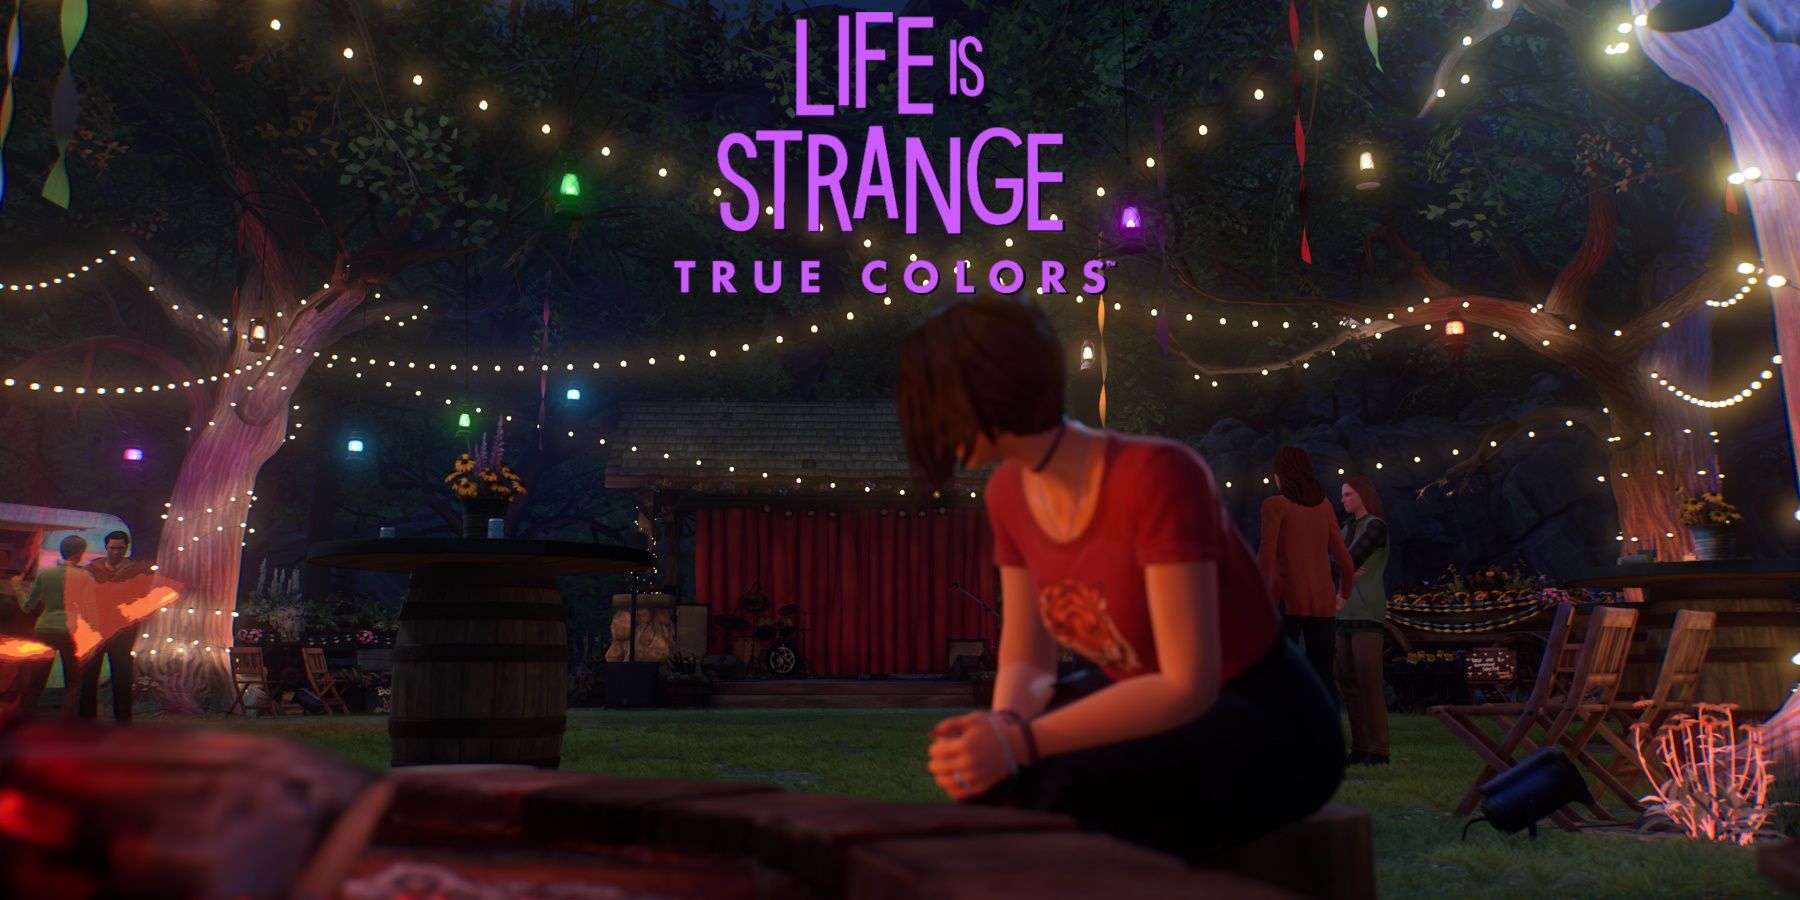 Life Is Strange: True Colors: Chapter 4 - All Memory Collectibles Locations